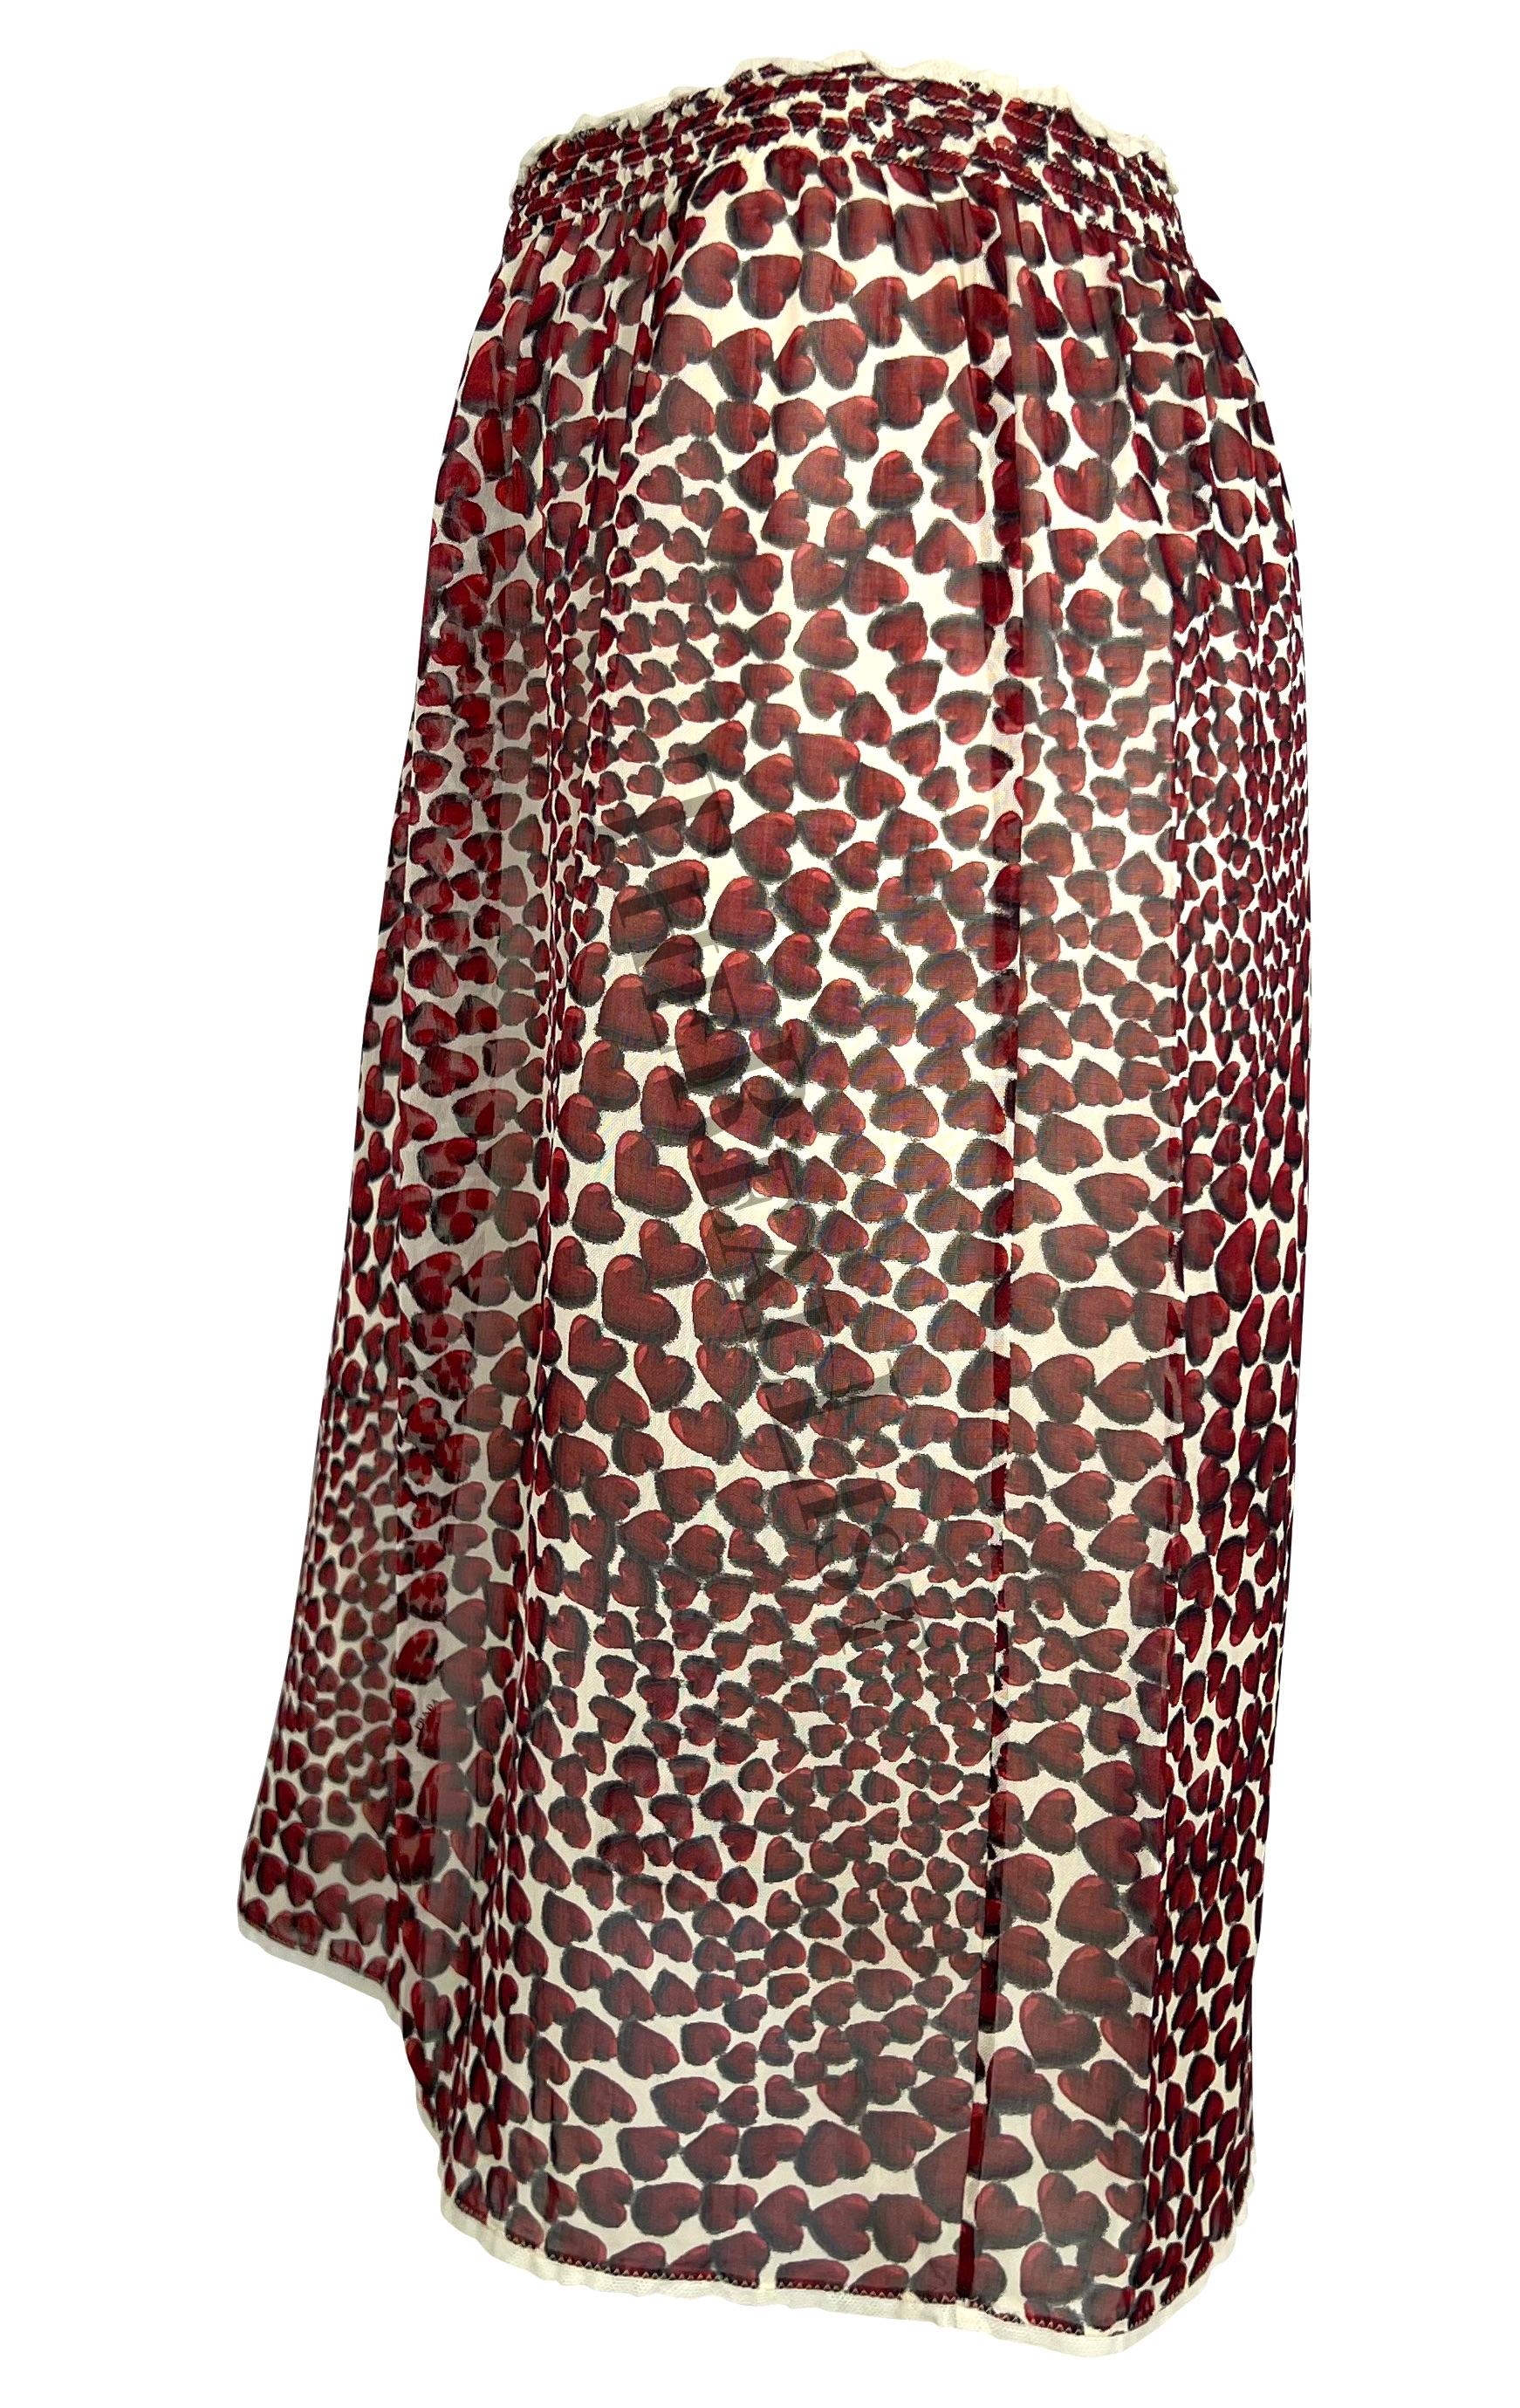 S/S 2000 Prada by Miuccia Runway Semi-Sheer Heart Print Chiffon Skirt In Excellent Condition For Sale In West Hollywood, CA